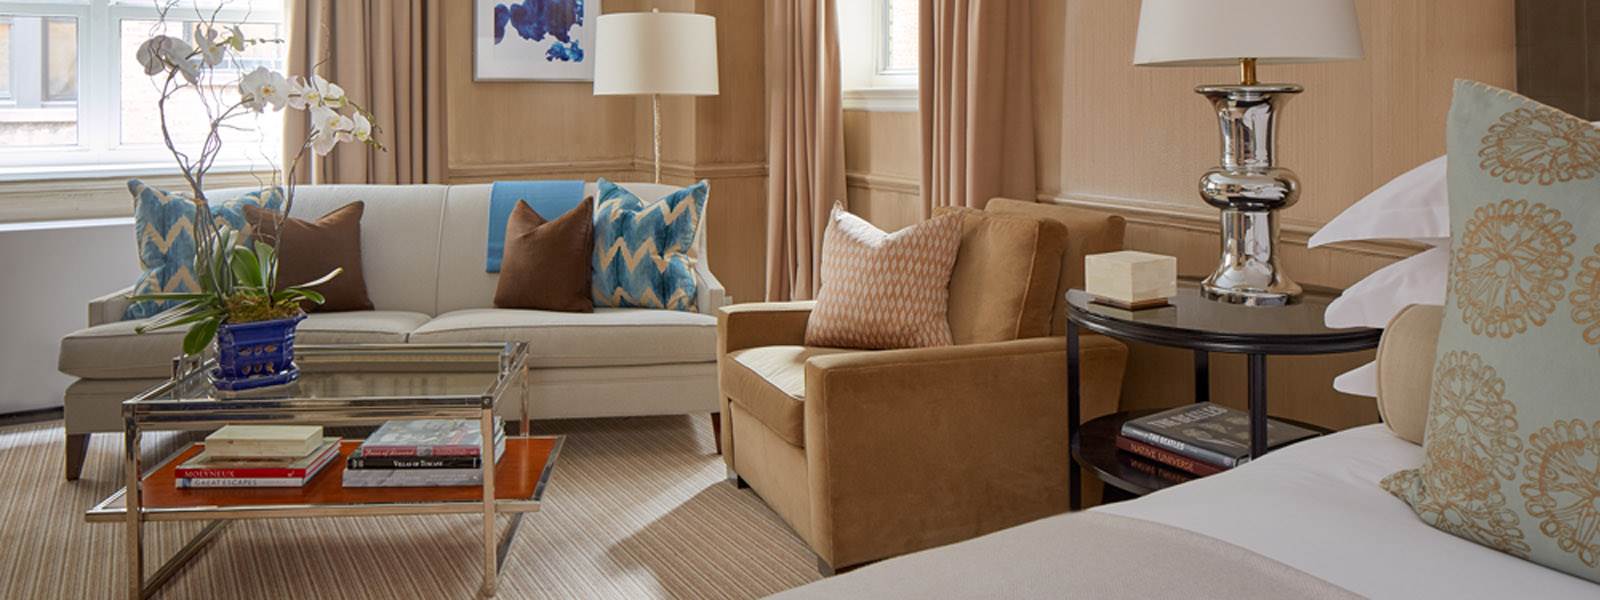 Luxury Hotels New York City stay in the Deluxe Junior Suite